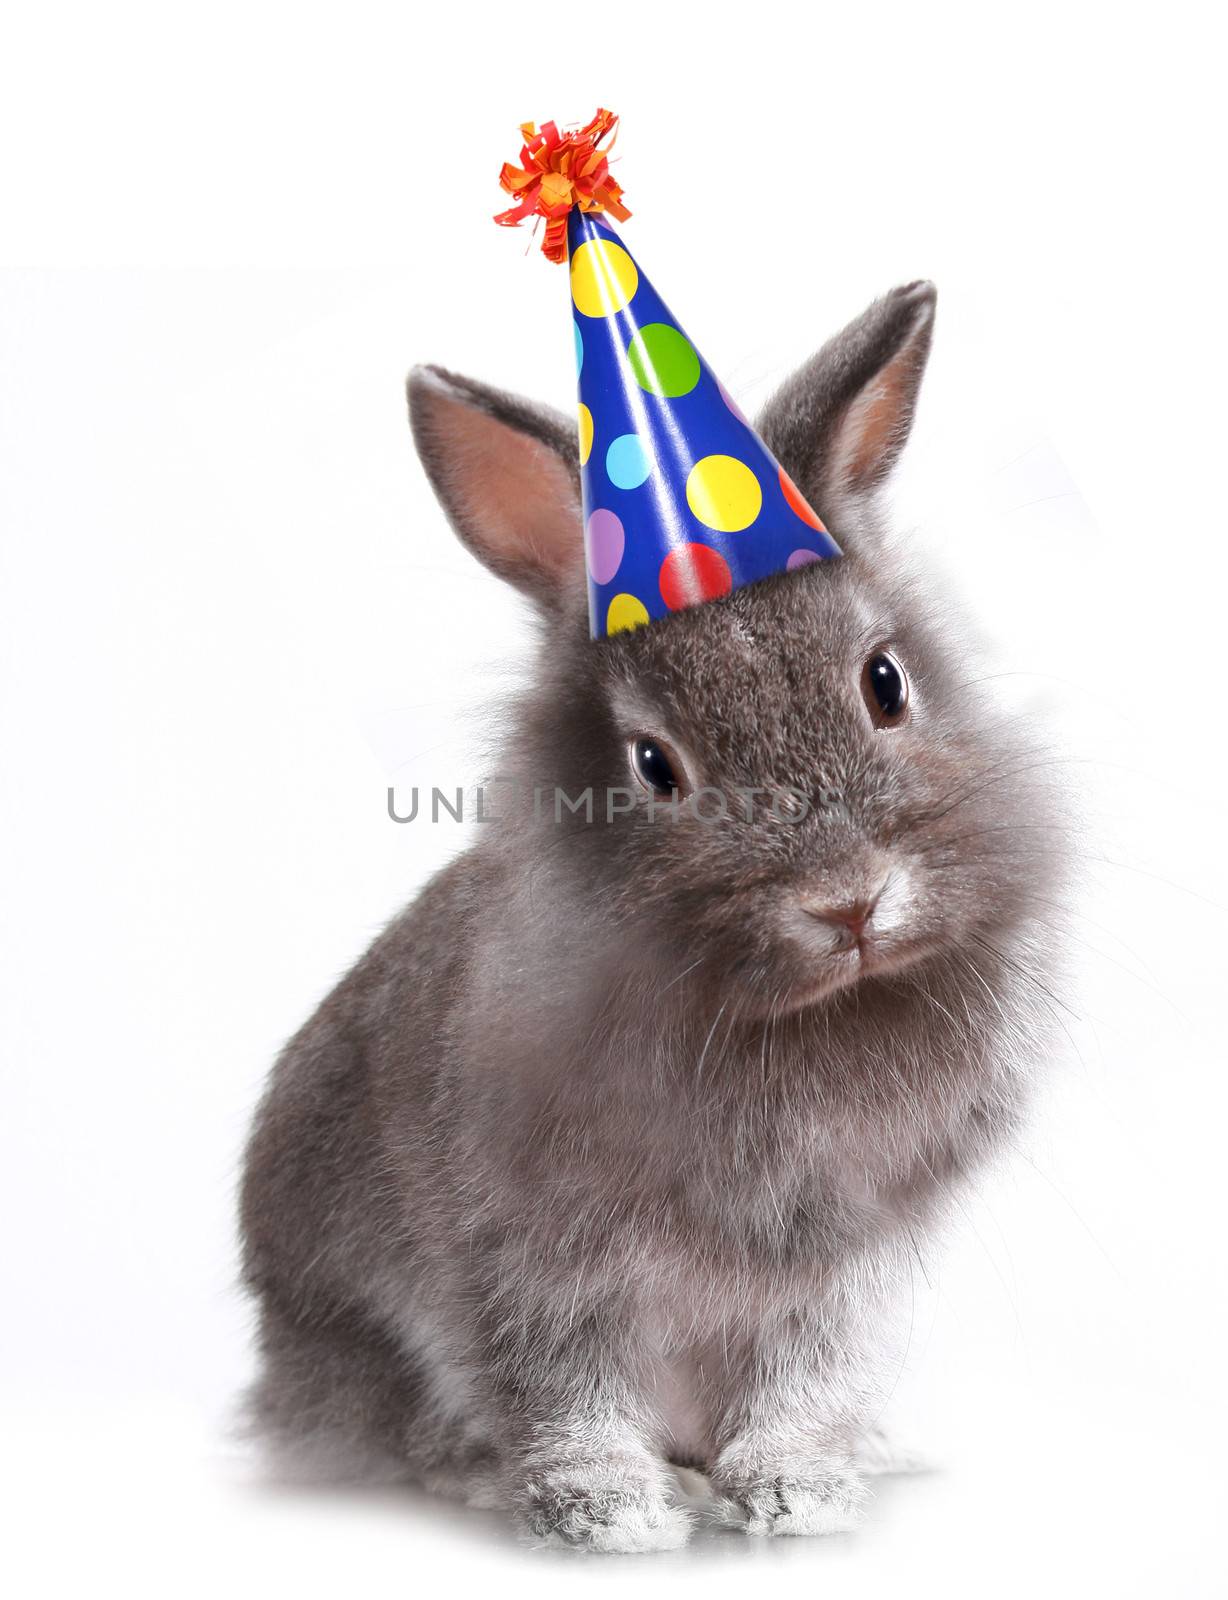 Funny Image of a Bunny Rabbit Wearing a Birthday Hat